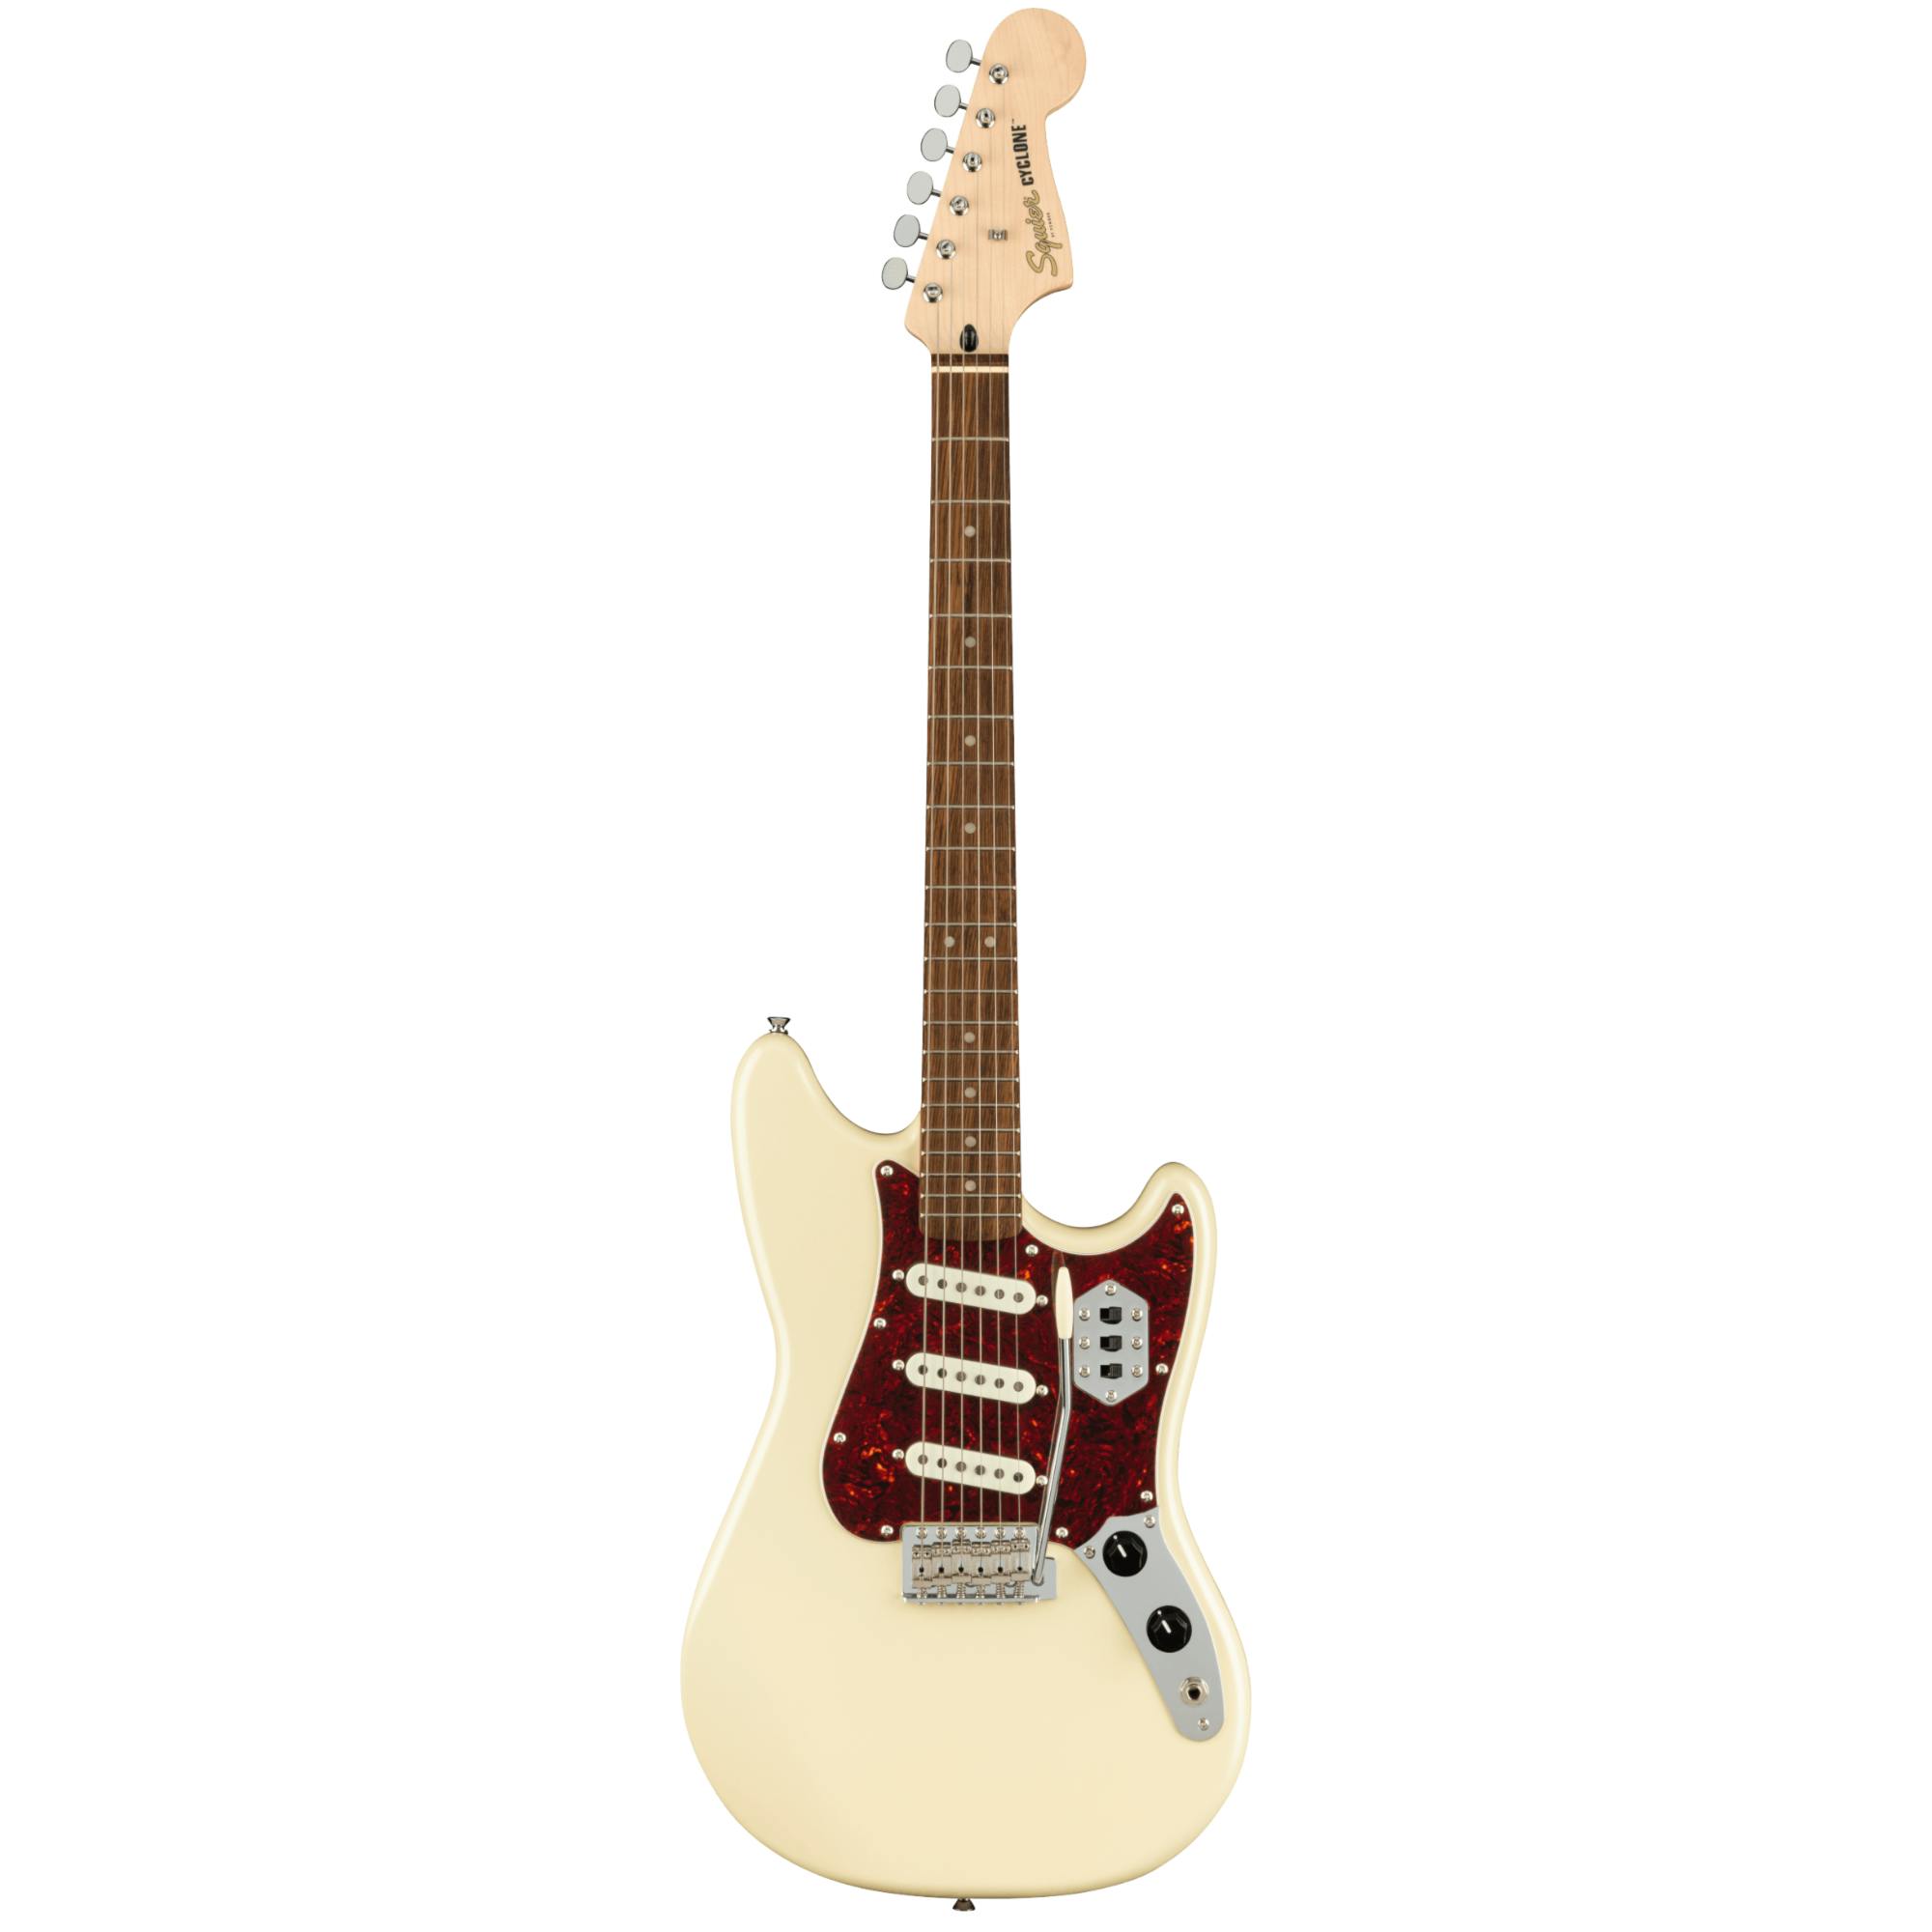 Squier by Fender CYCLONE スクワイア サイクロン - 楽器/器材